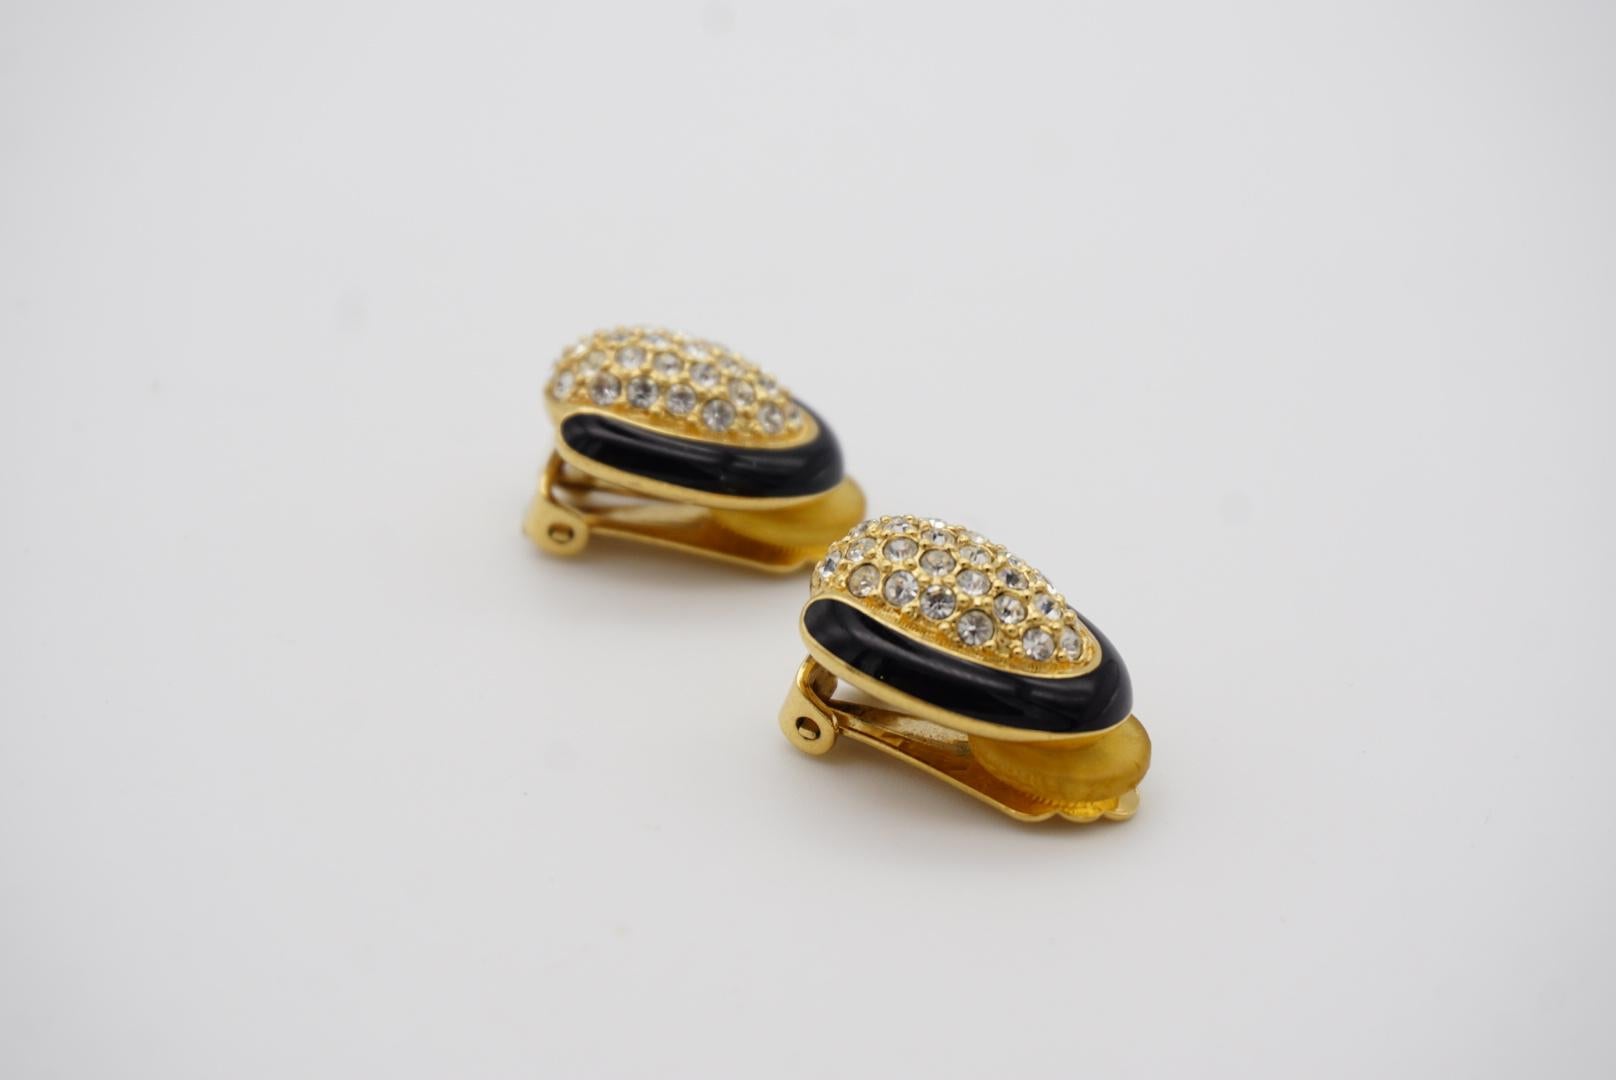 Christian Dior Vintage 1980s Oval Whole Crystals Black Gold Clip On Earrings In Excellent Condition For Sale In Wokingham, England